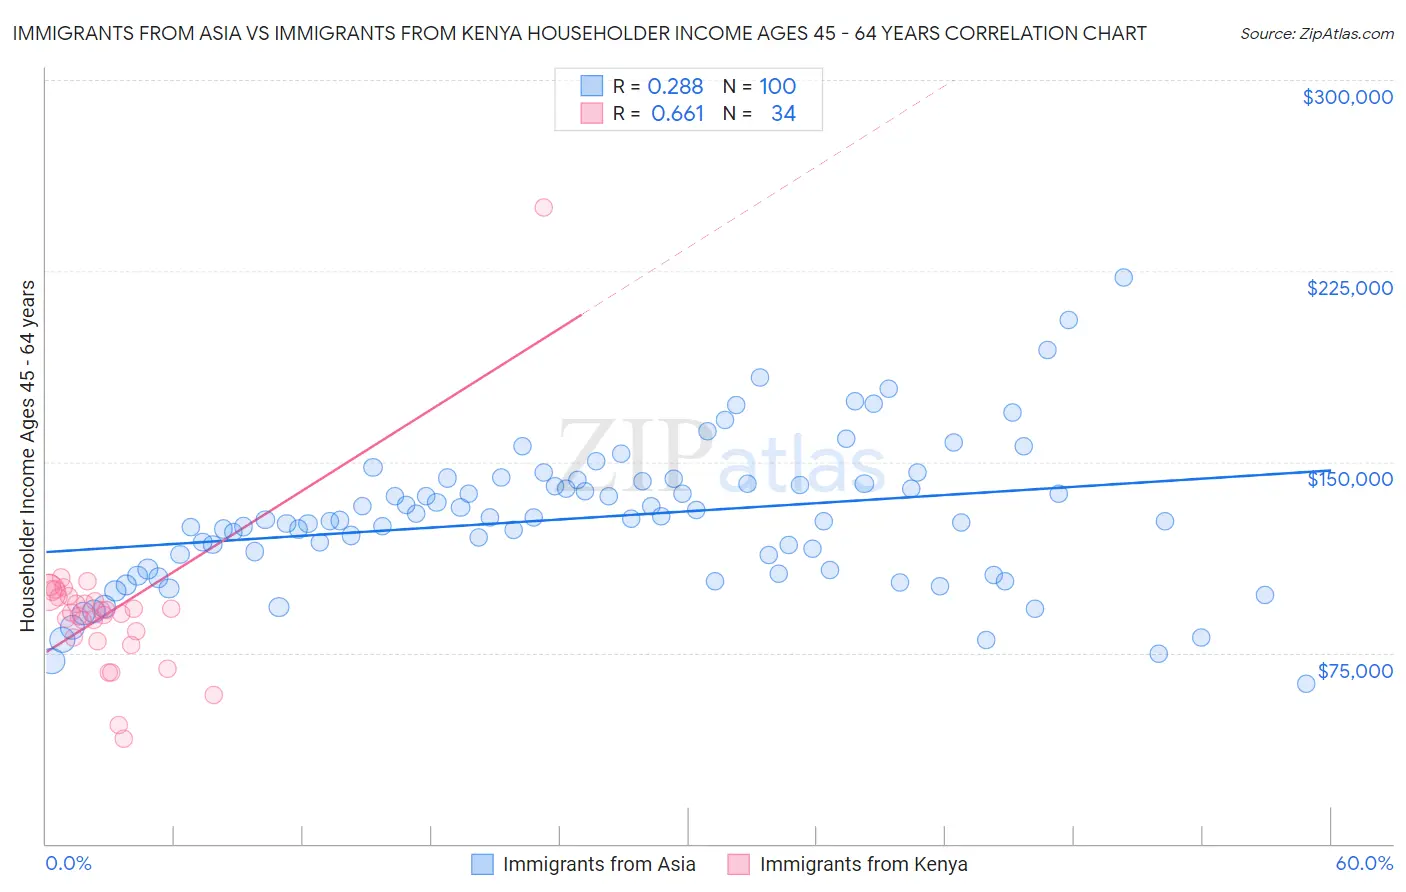 Immigrants from Asia vs Immigrants from Kenya Householder Income Ages 45 - 64 years